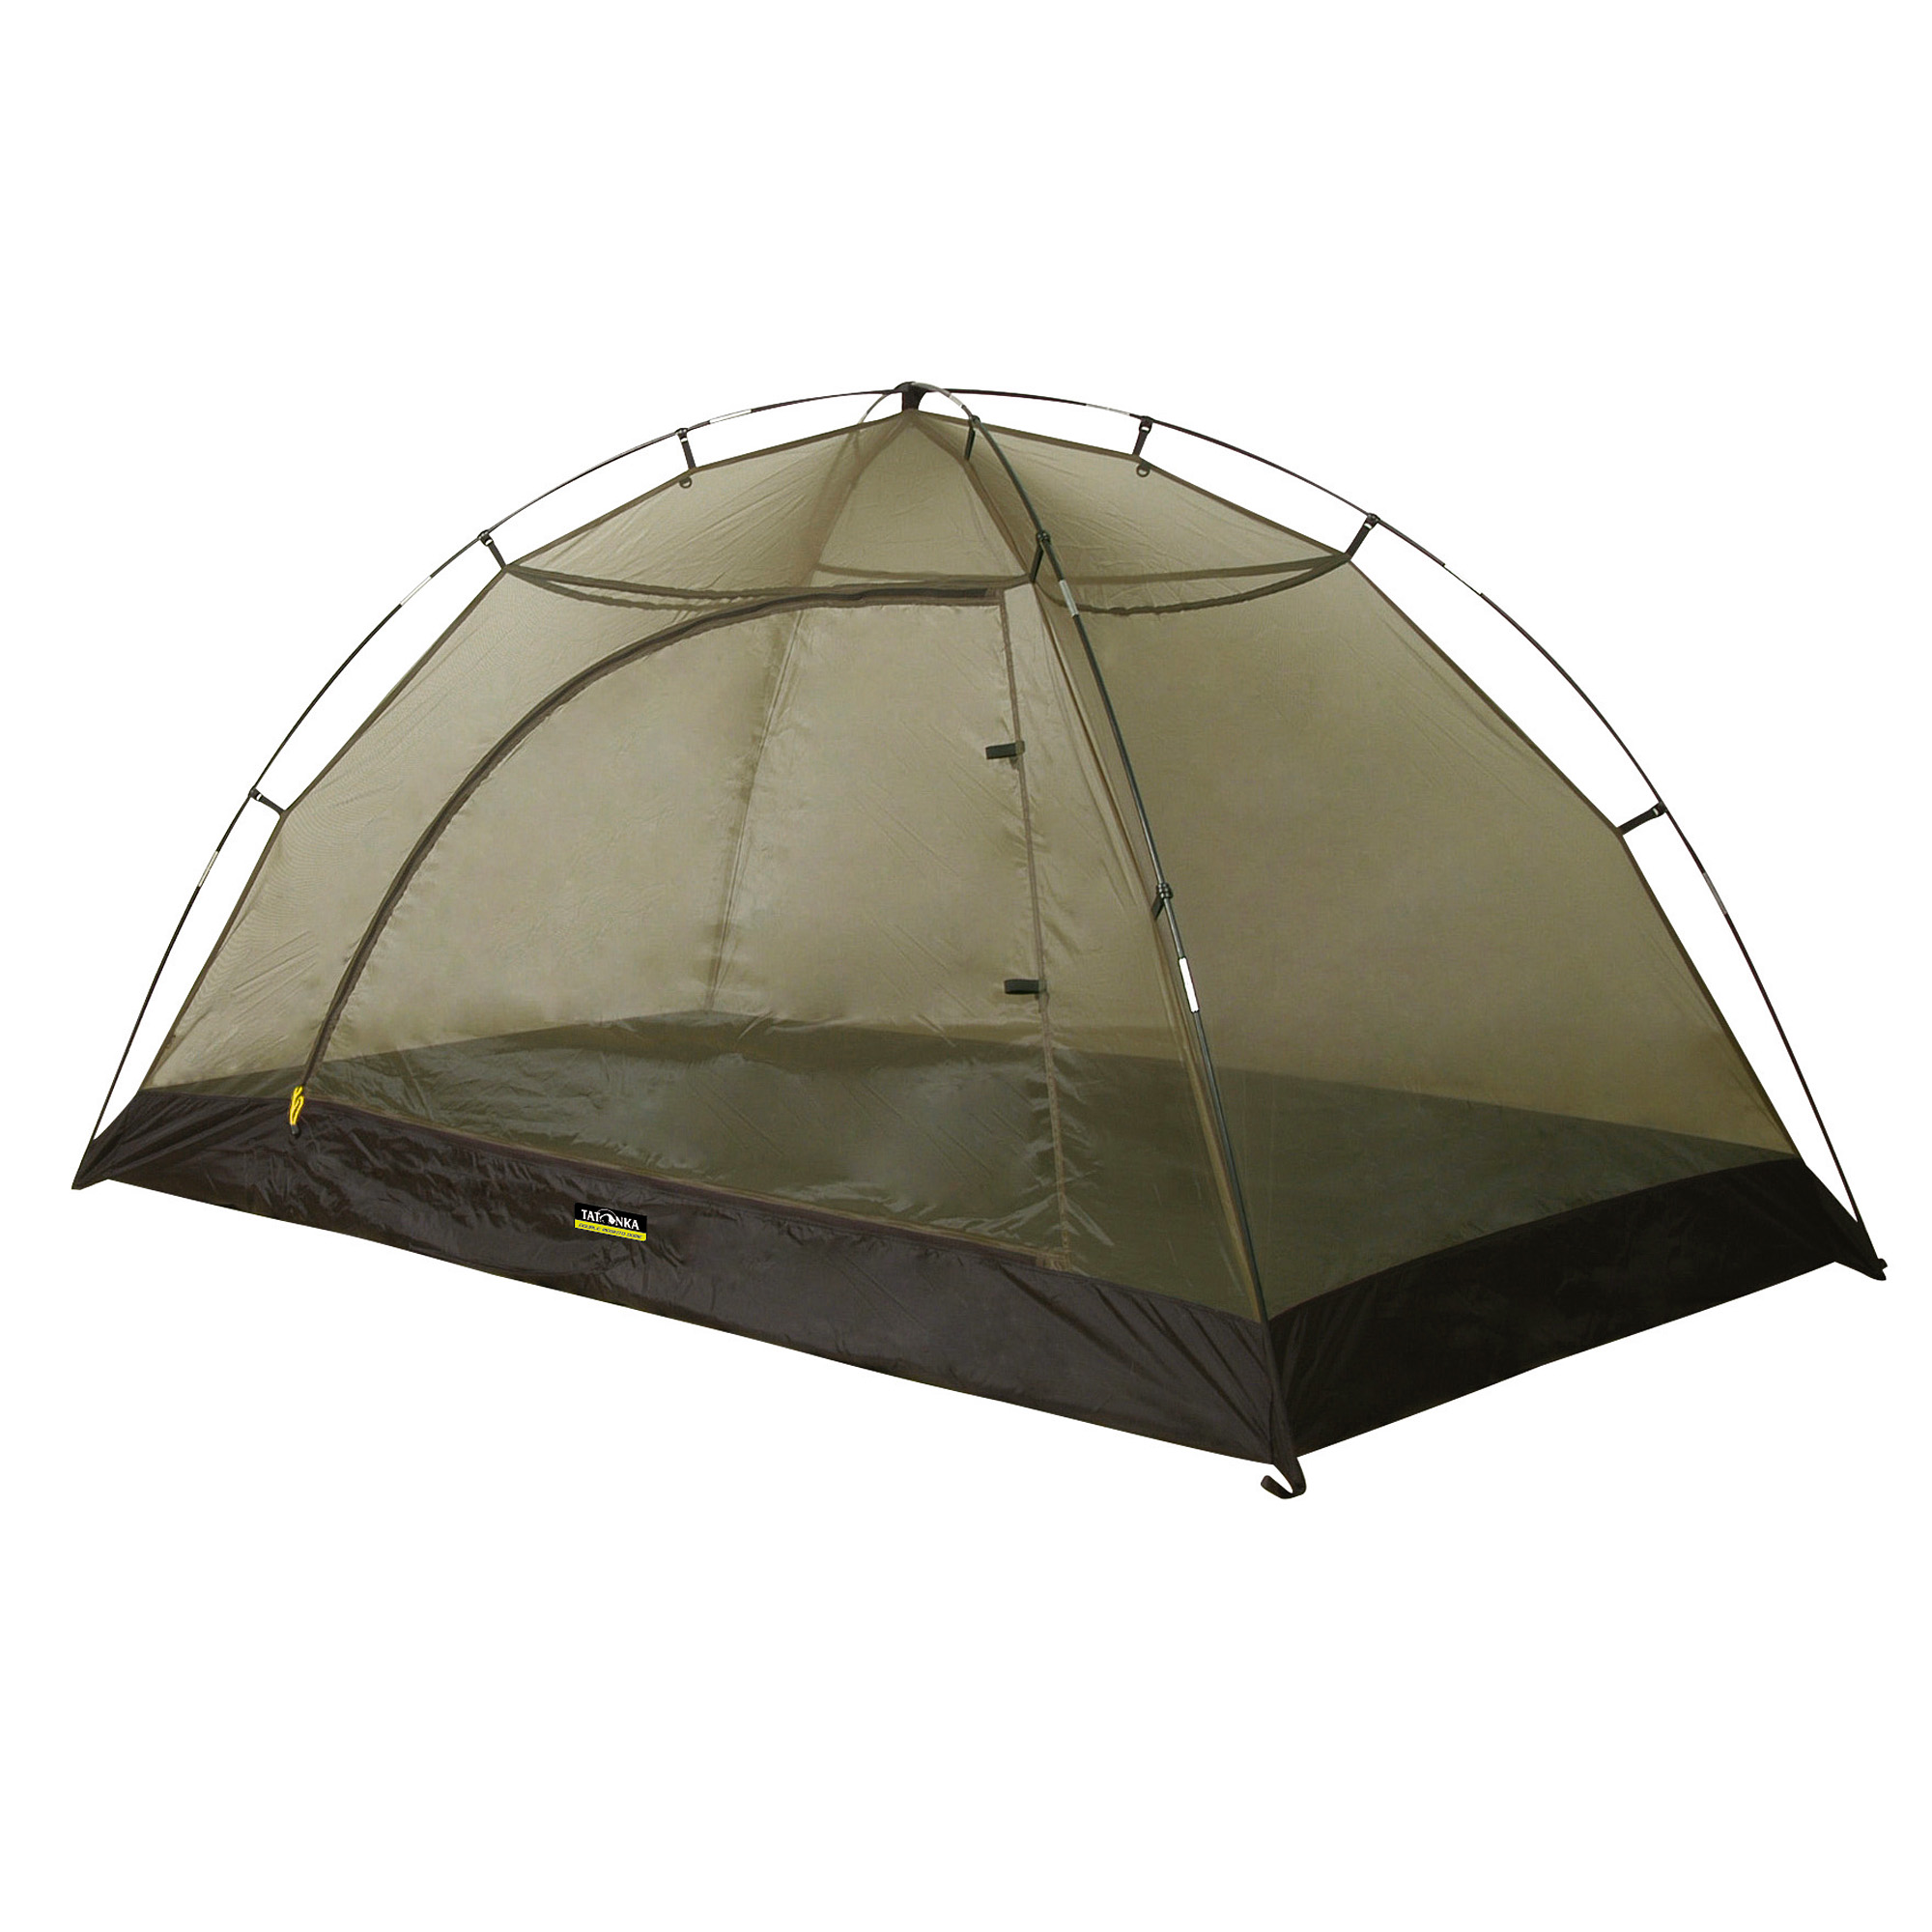 OUTDOOR CAMPING MOSQUITO NET DOME TENT AVAILABLE IN KENYA